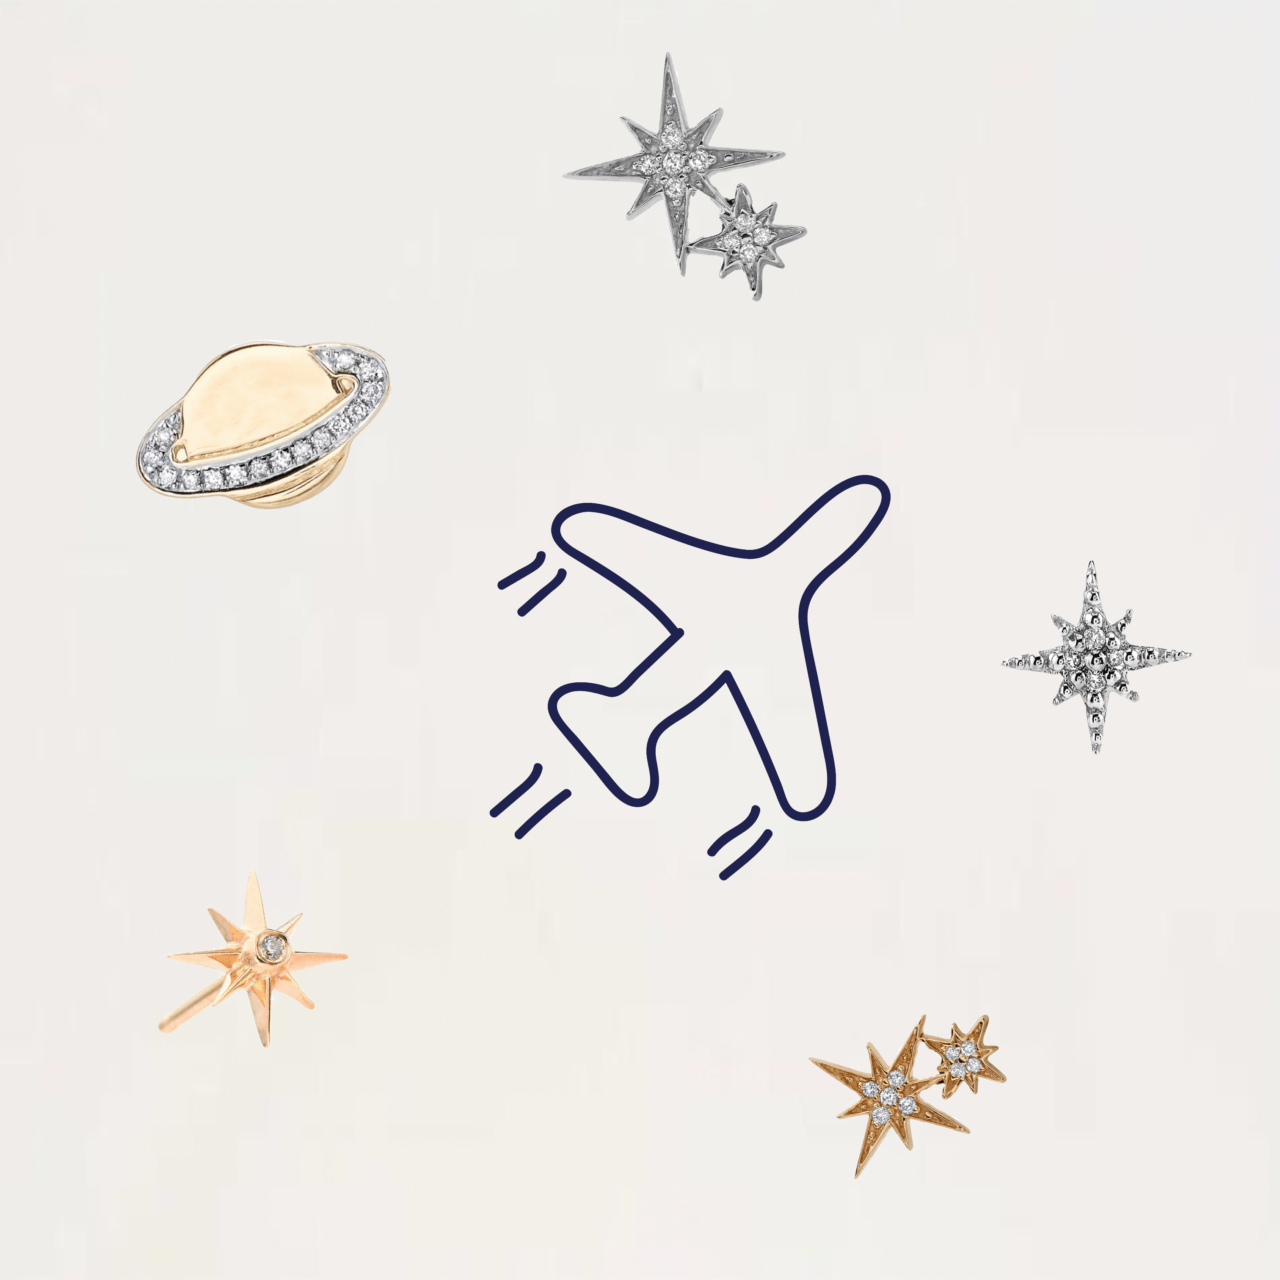 Various illustrations of astral stars with an illustration of an aeroplane.